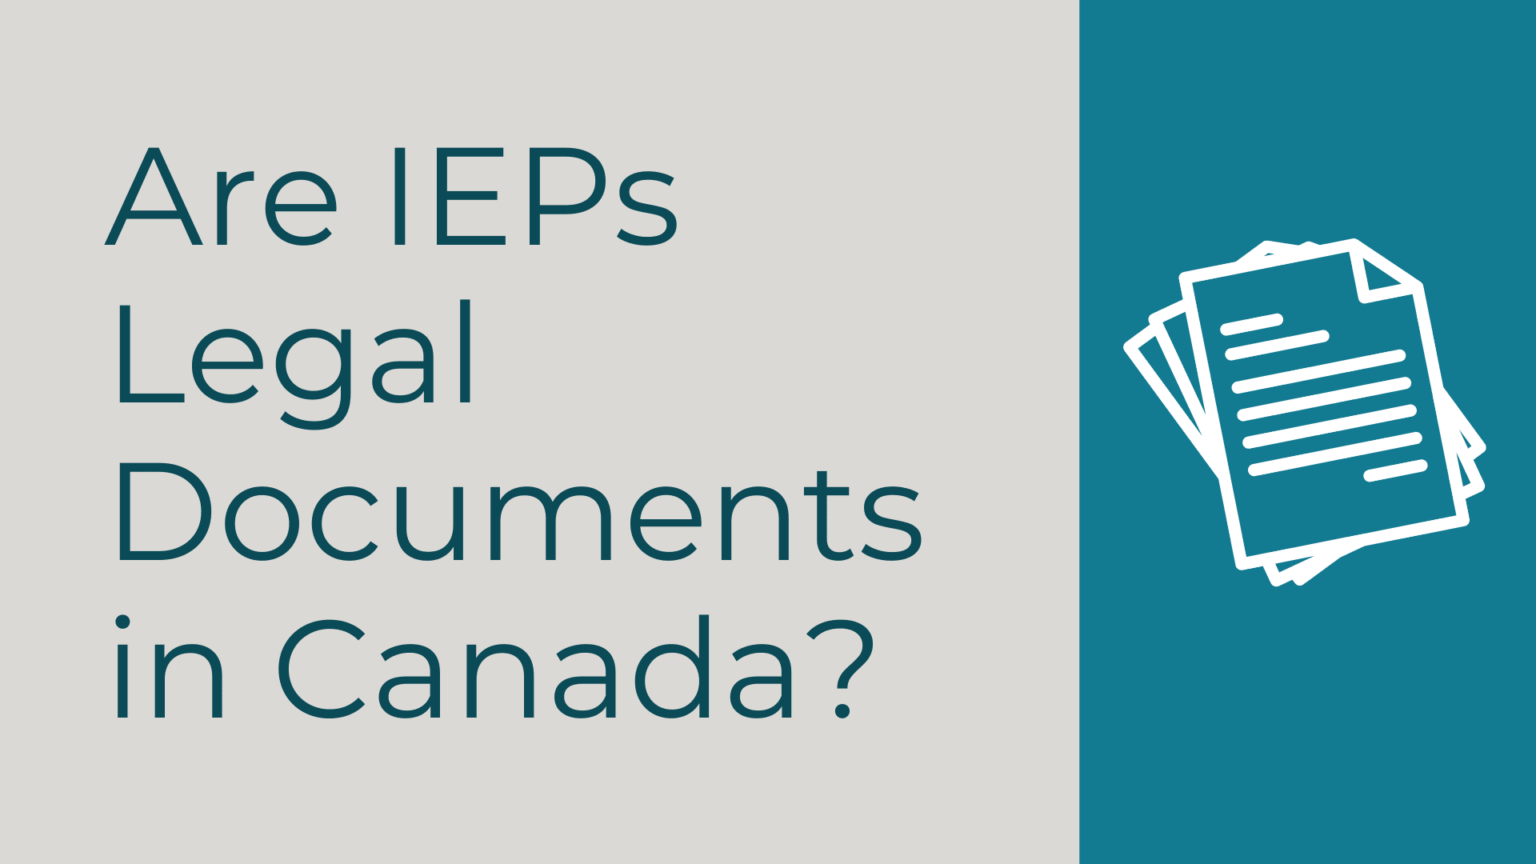 Are IEPs Legal Documents?